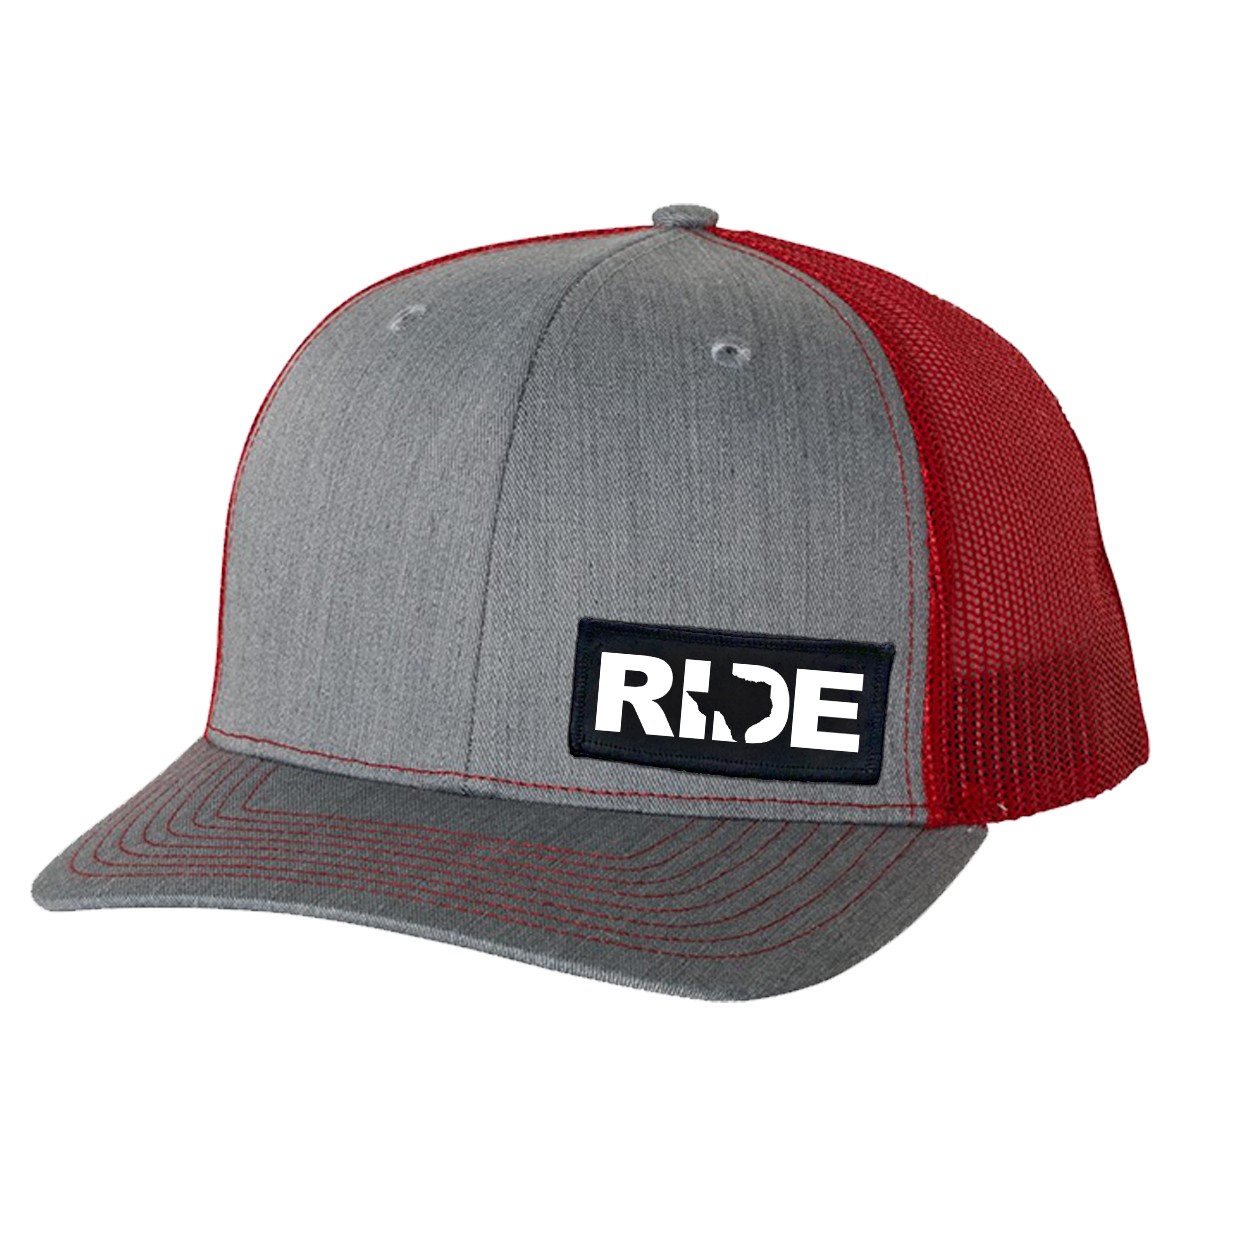 Ride Texas Night Out Woven Patch Snapback Trucker Hat Heather Heather Grey/Red (White Logo)